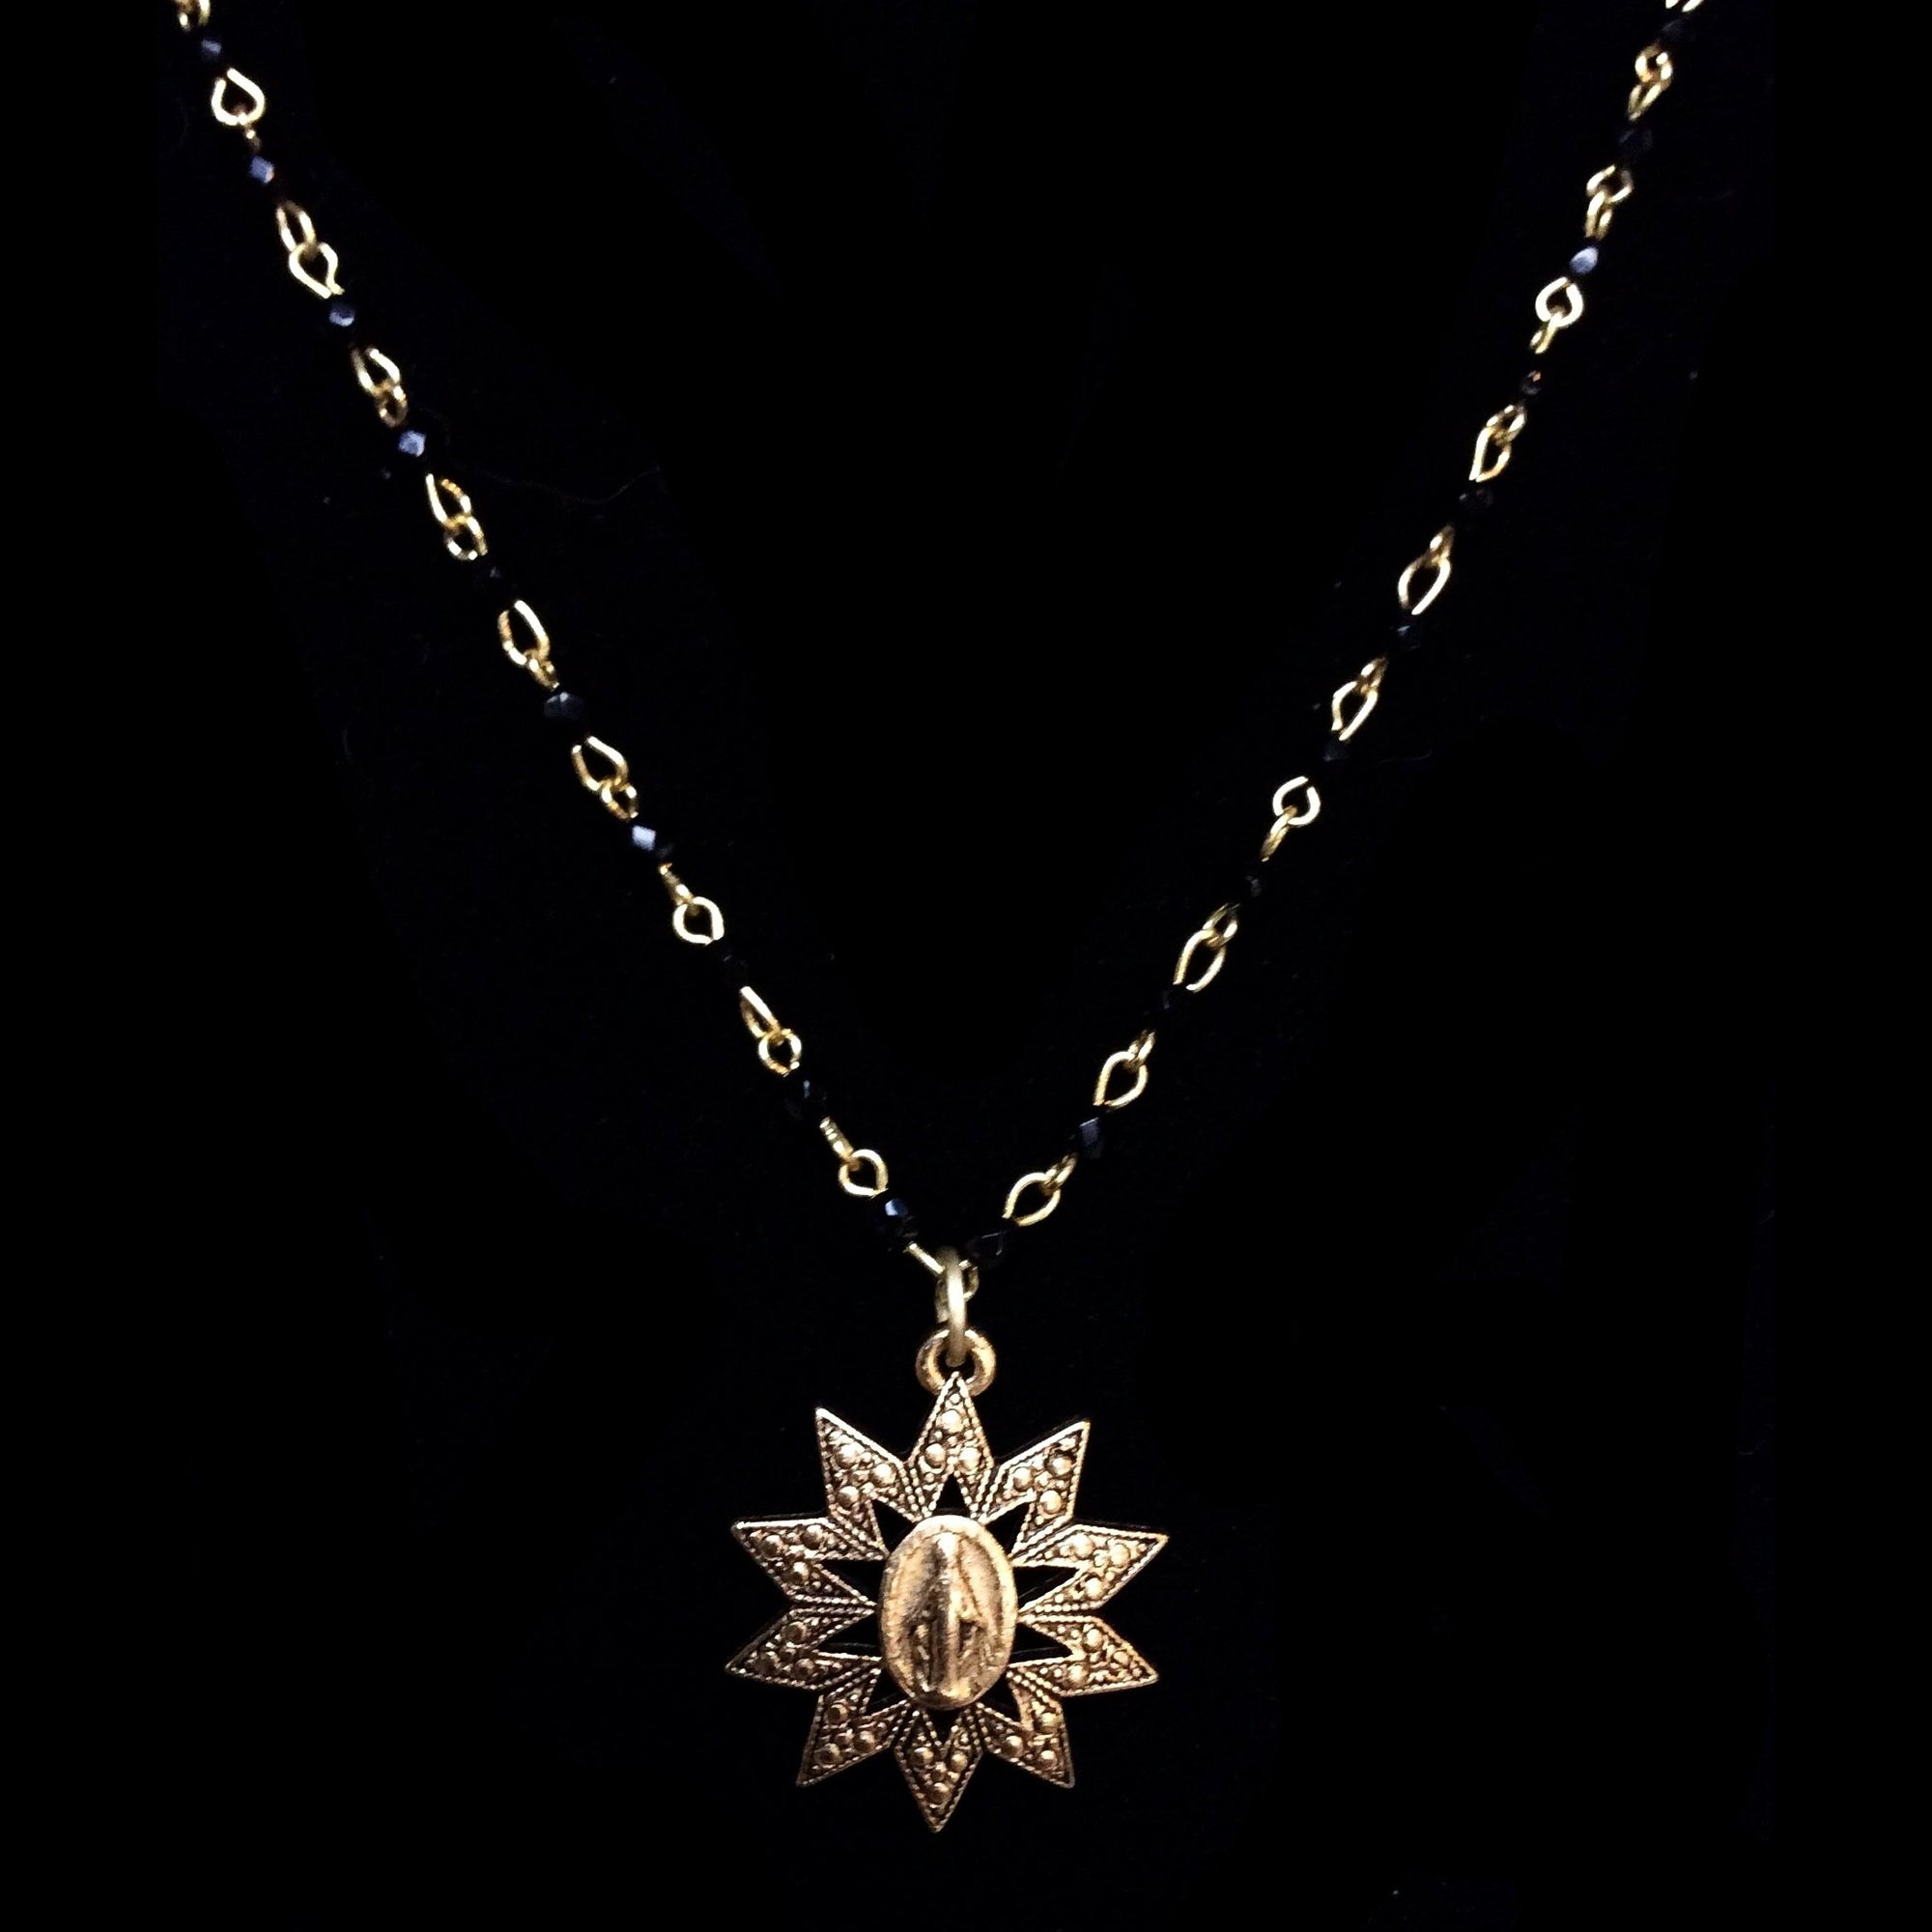 Forgotten Graces "Miraculous Rays" Medal in Black Jet and Gold Necklace